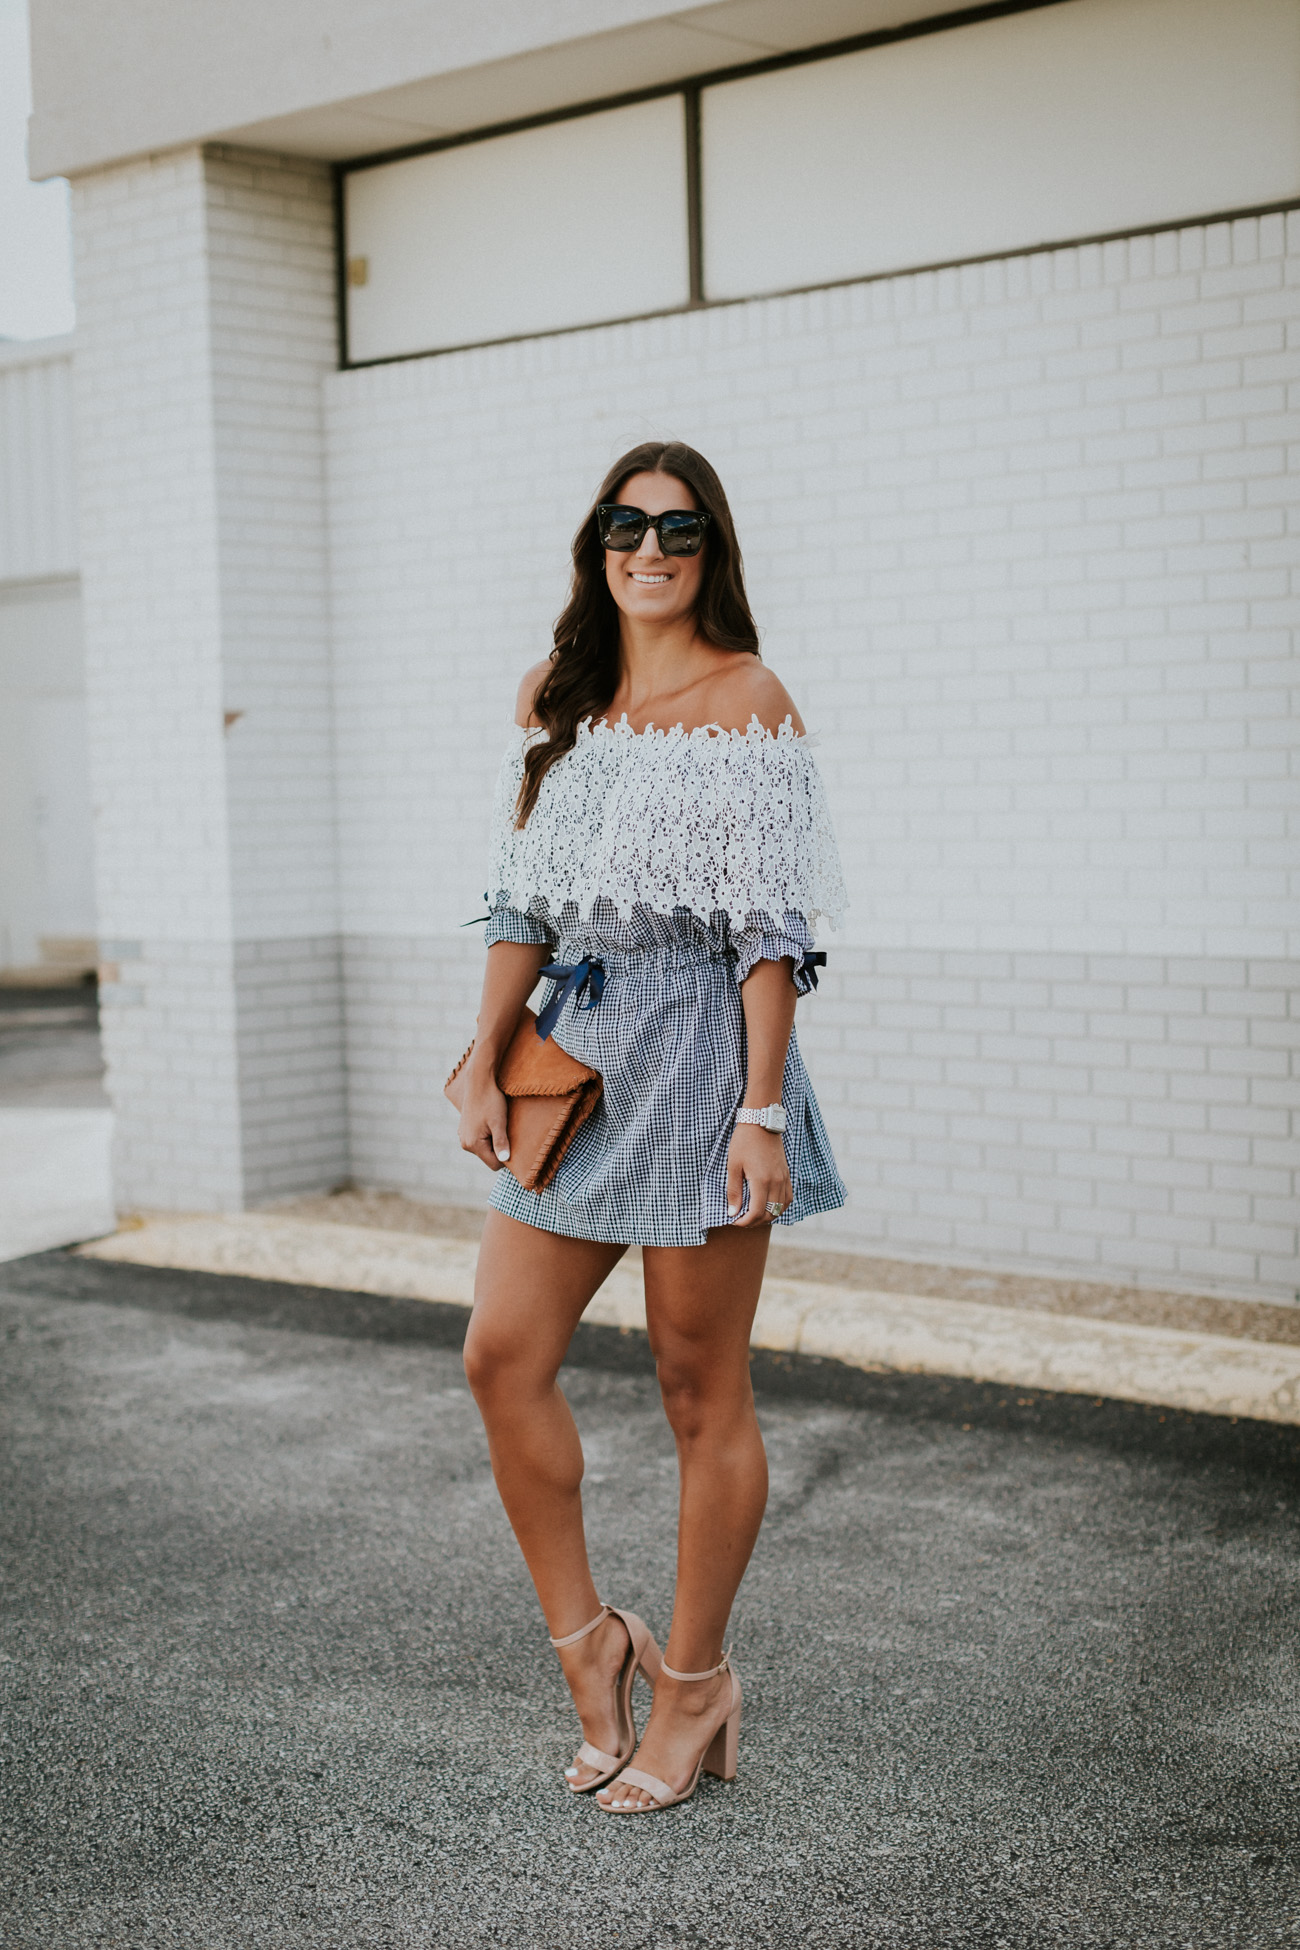 gingham off the shoulder dress, chicwish off the shoulder dress, chicwish dresses, embroidered dress, gingham dresses, summer dresses, summer outfits, summer fashion, summer style // grace wainwright a southern drawl